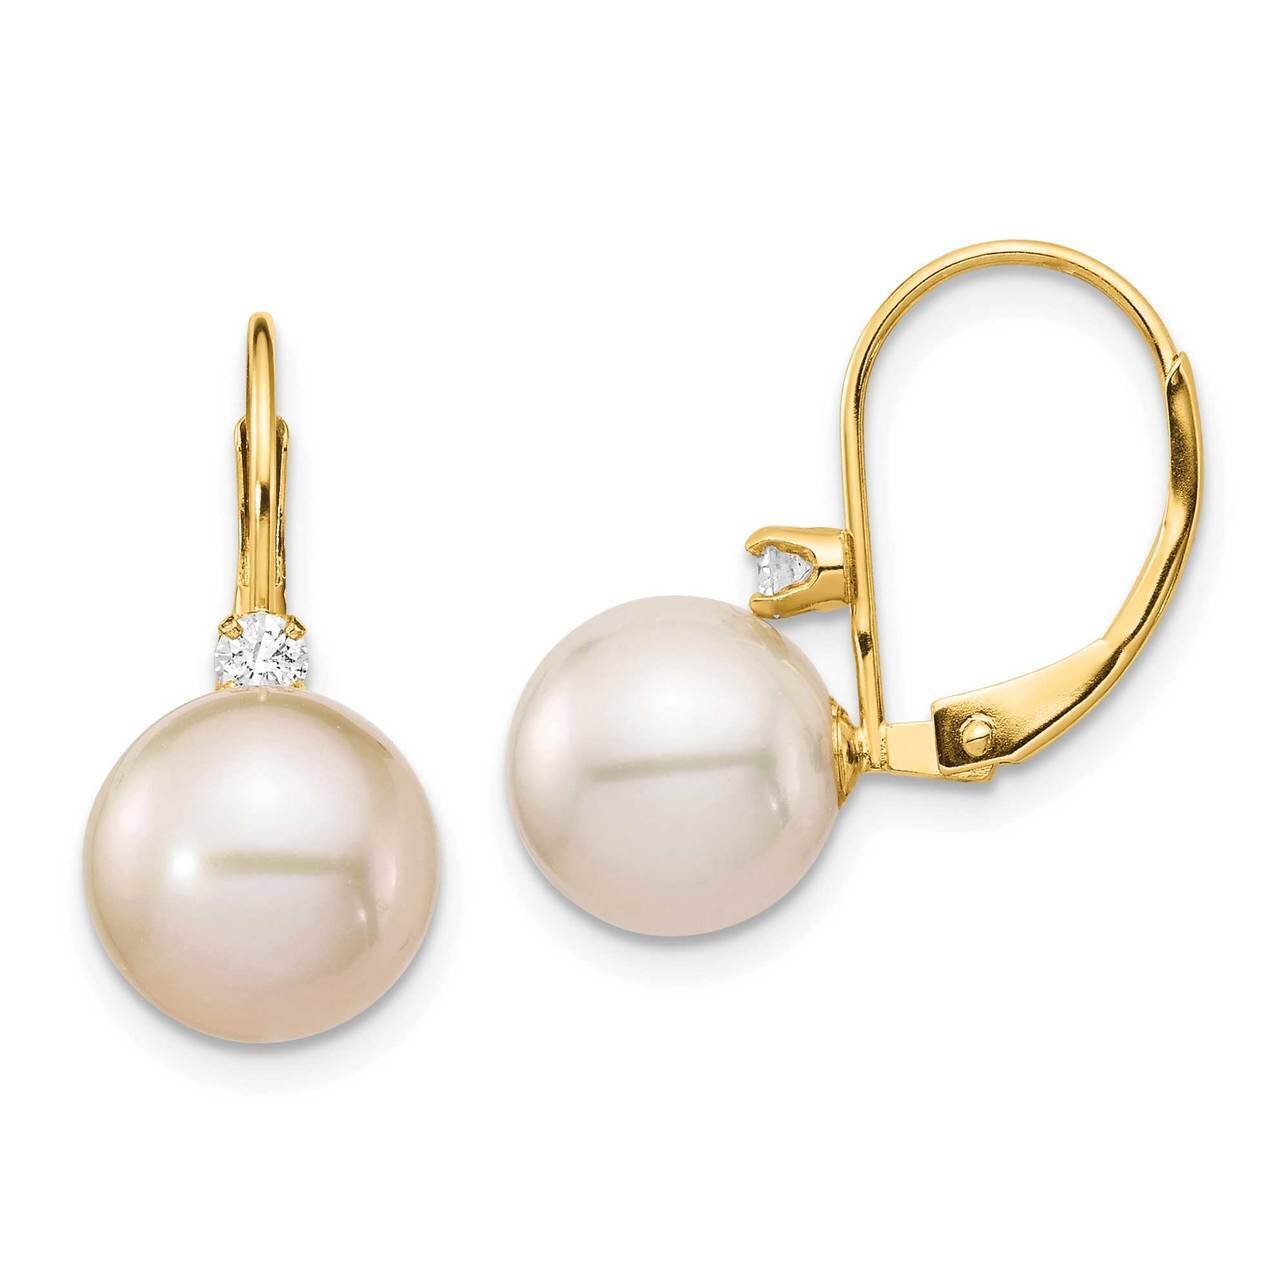 9-9.5mm White Round Freshwater Cultured Pearl .10ct Diamond Leverback Earrings 14k Gold XF699E